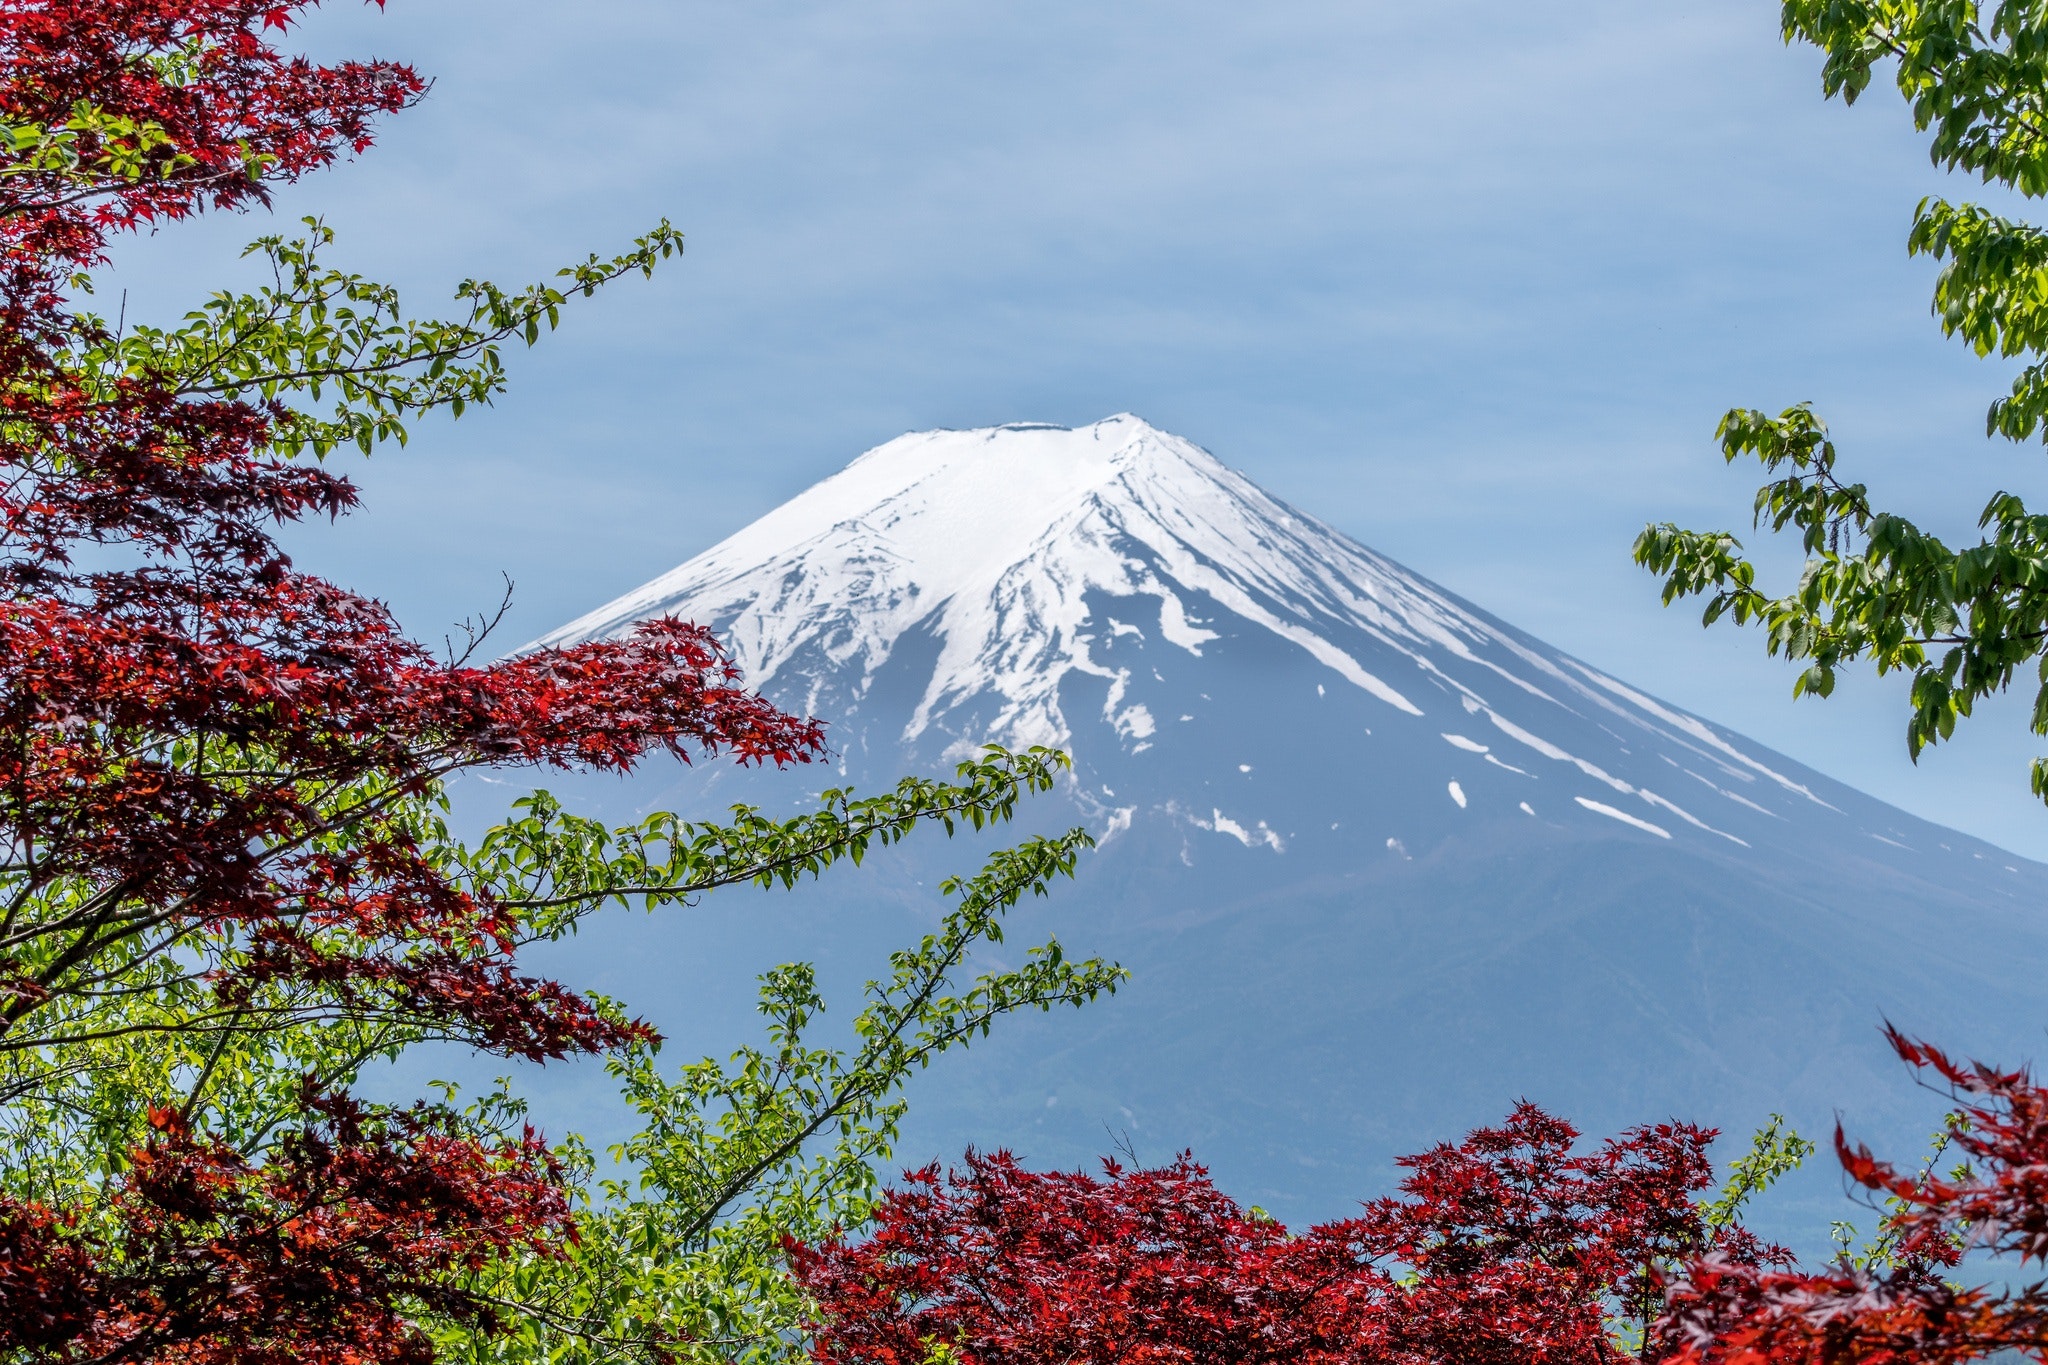 Day 03 -Excursion to Mt. Fuji: The Tallest Peak In Japan :-